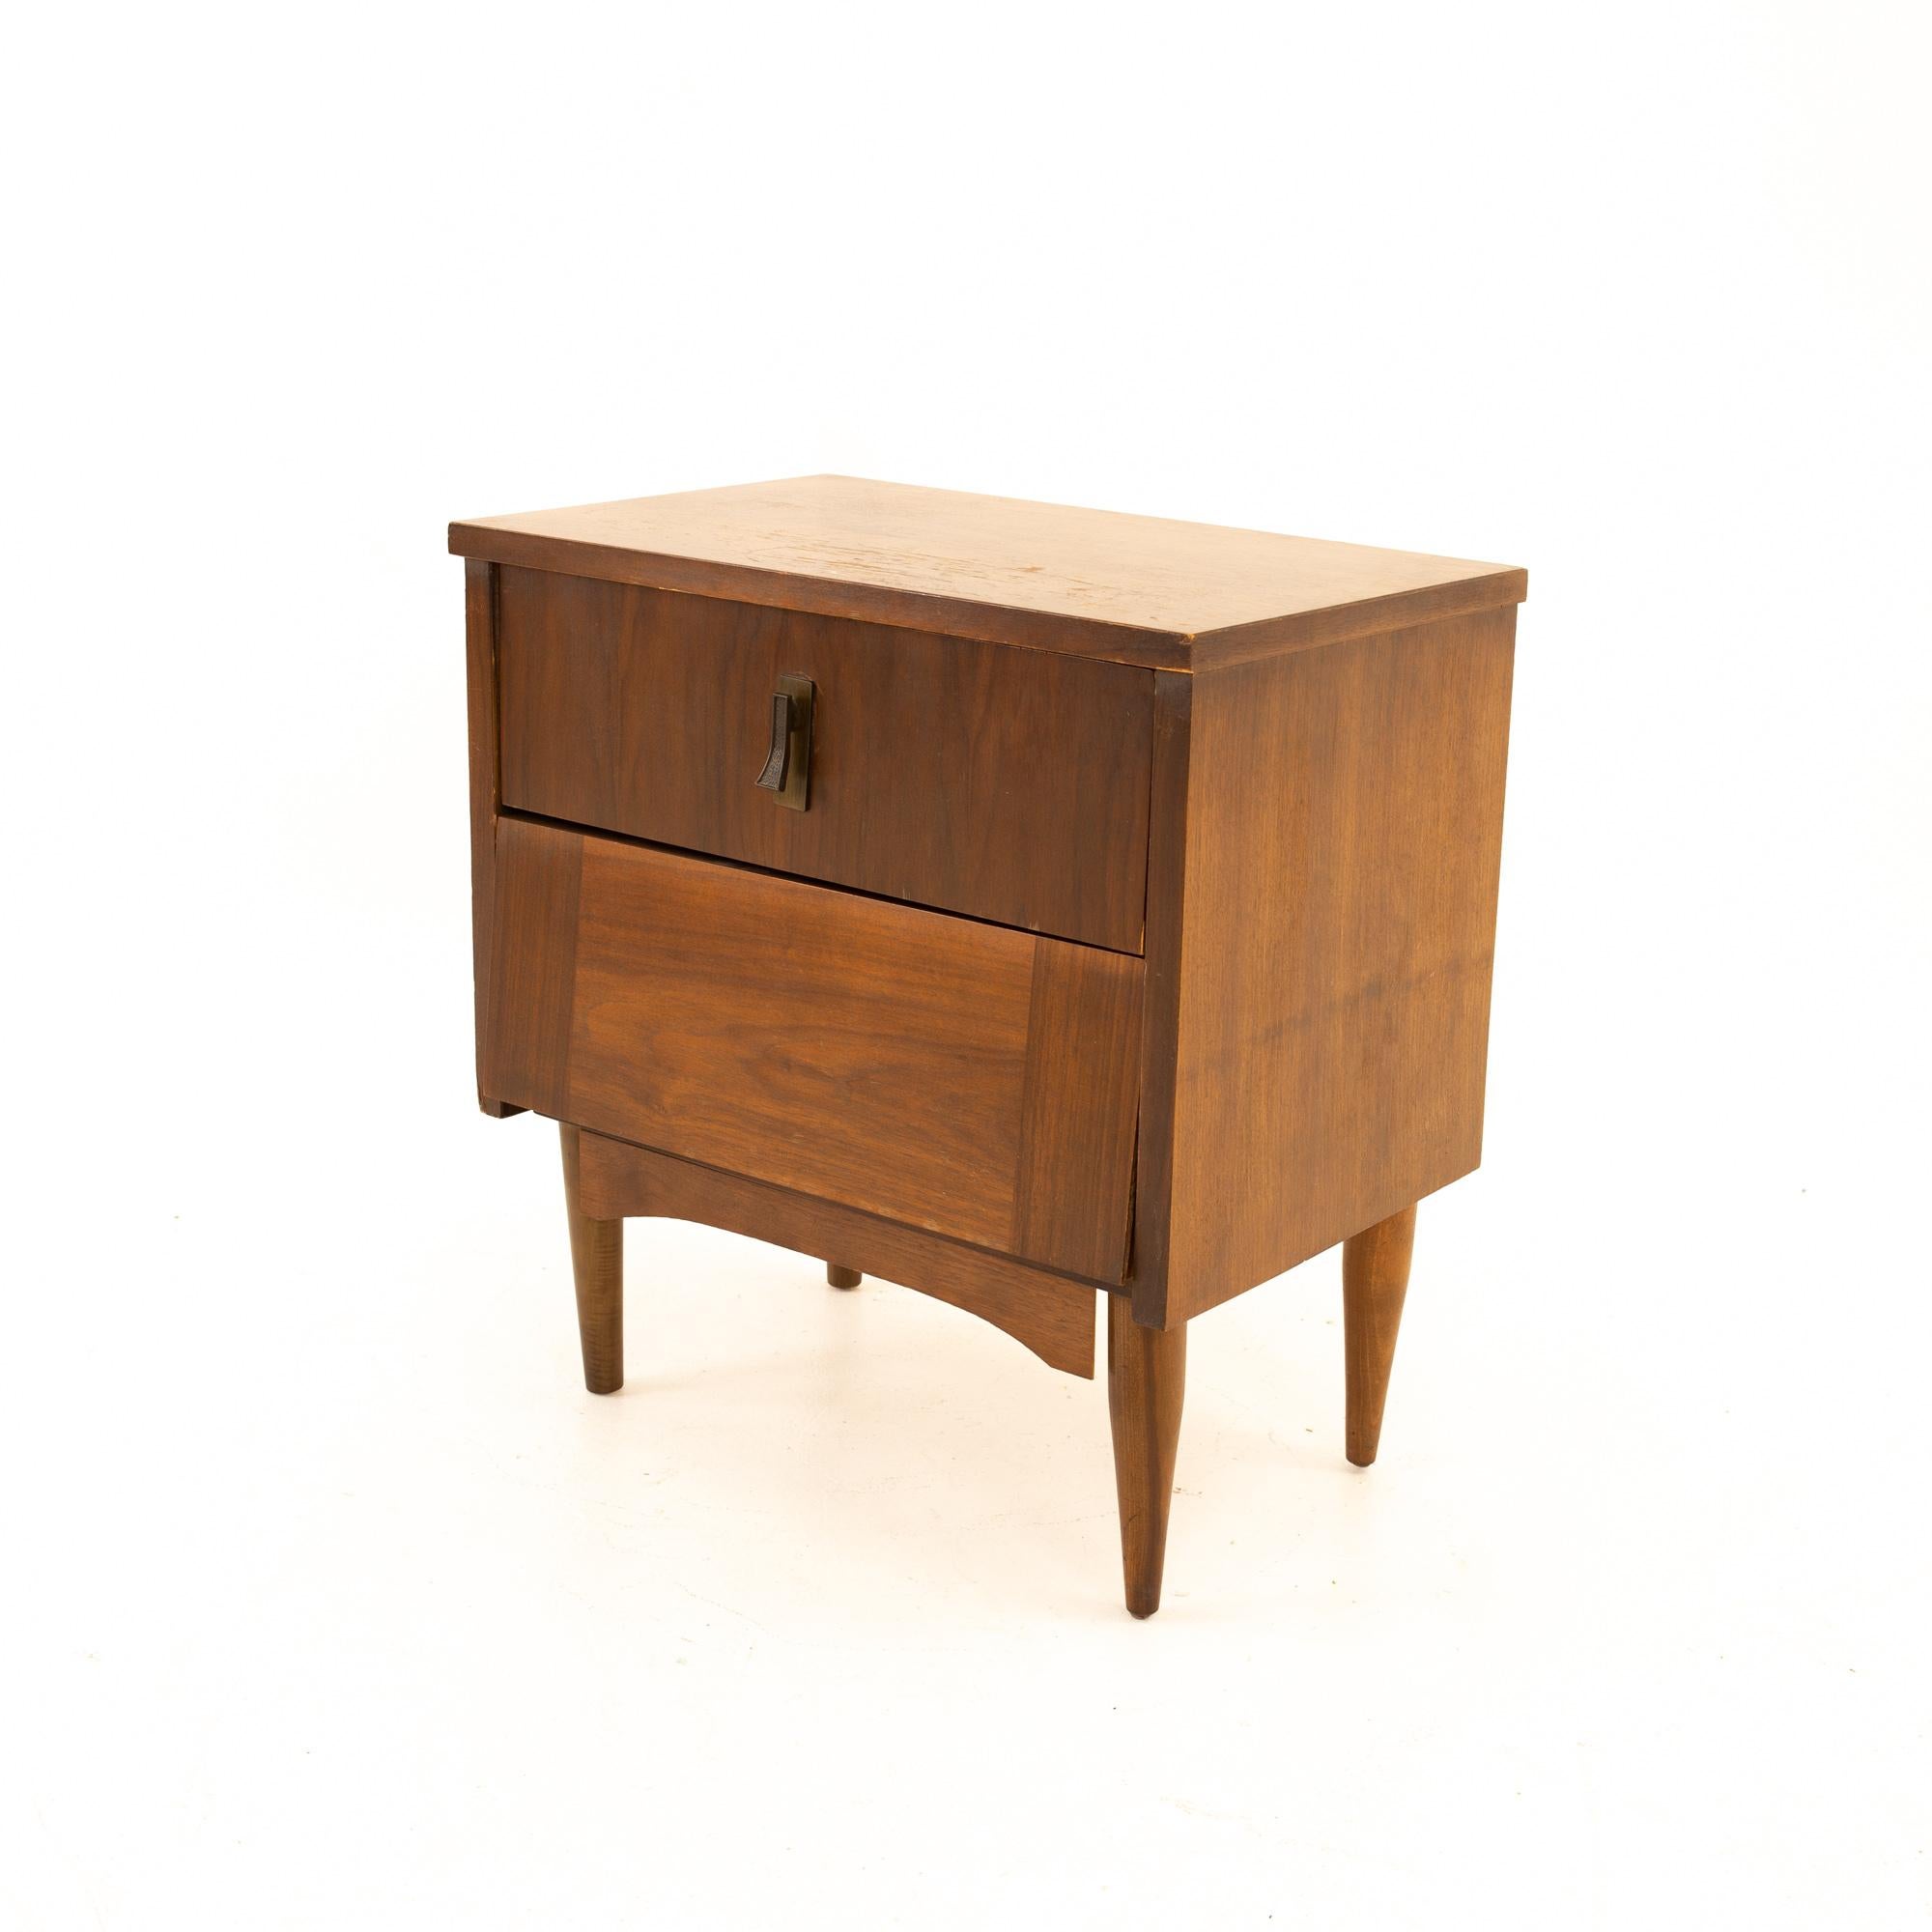 Mid Century Walnut Nightstand

Nightstand measures: 21.75 wide x 14 deep x 23.25 high

All pieces of furniture can be had in what we call restored vintage condition. That means the piece is restored upon purchase so it’s free of watermarks,